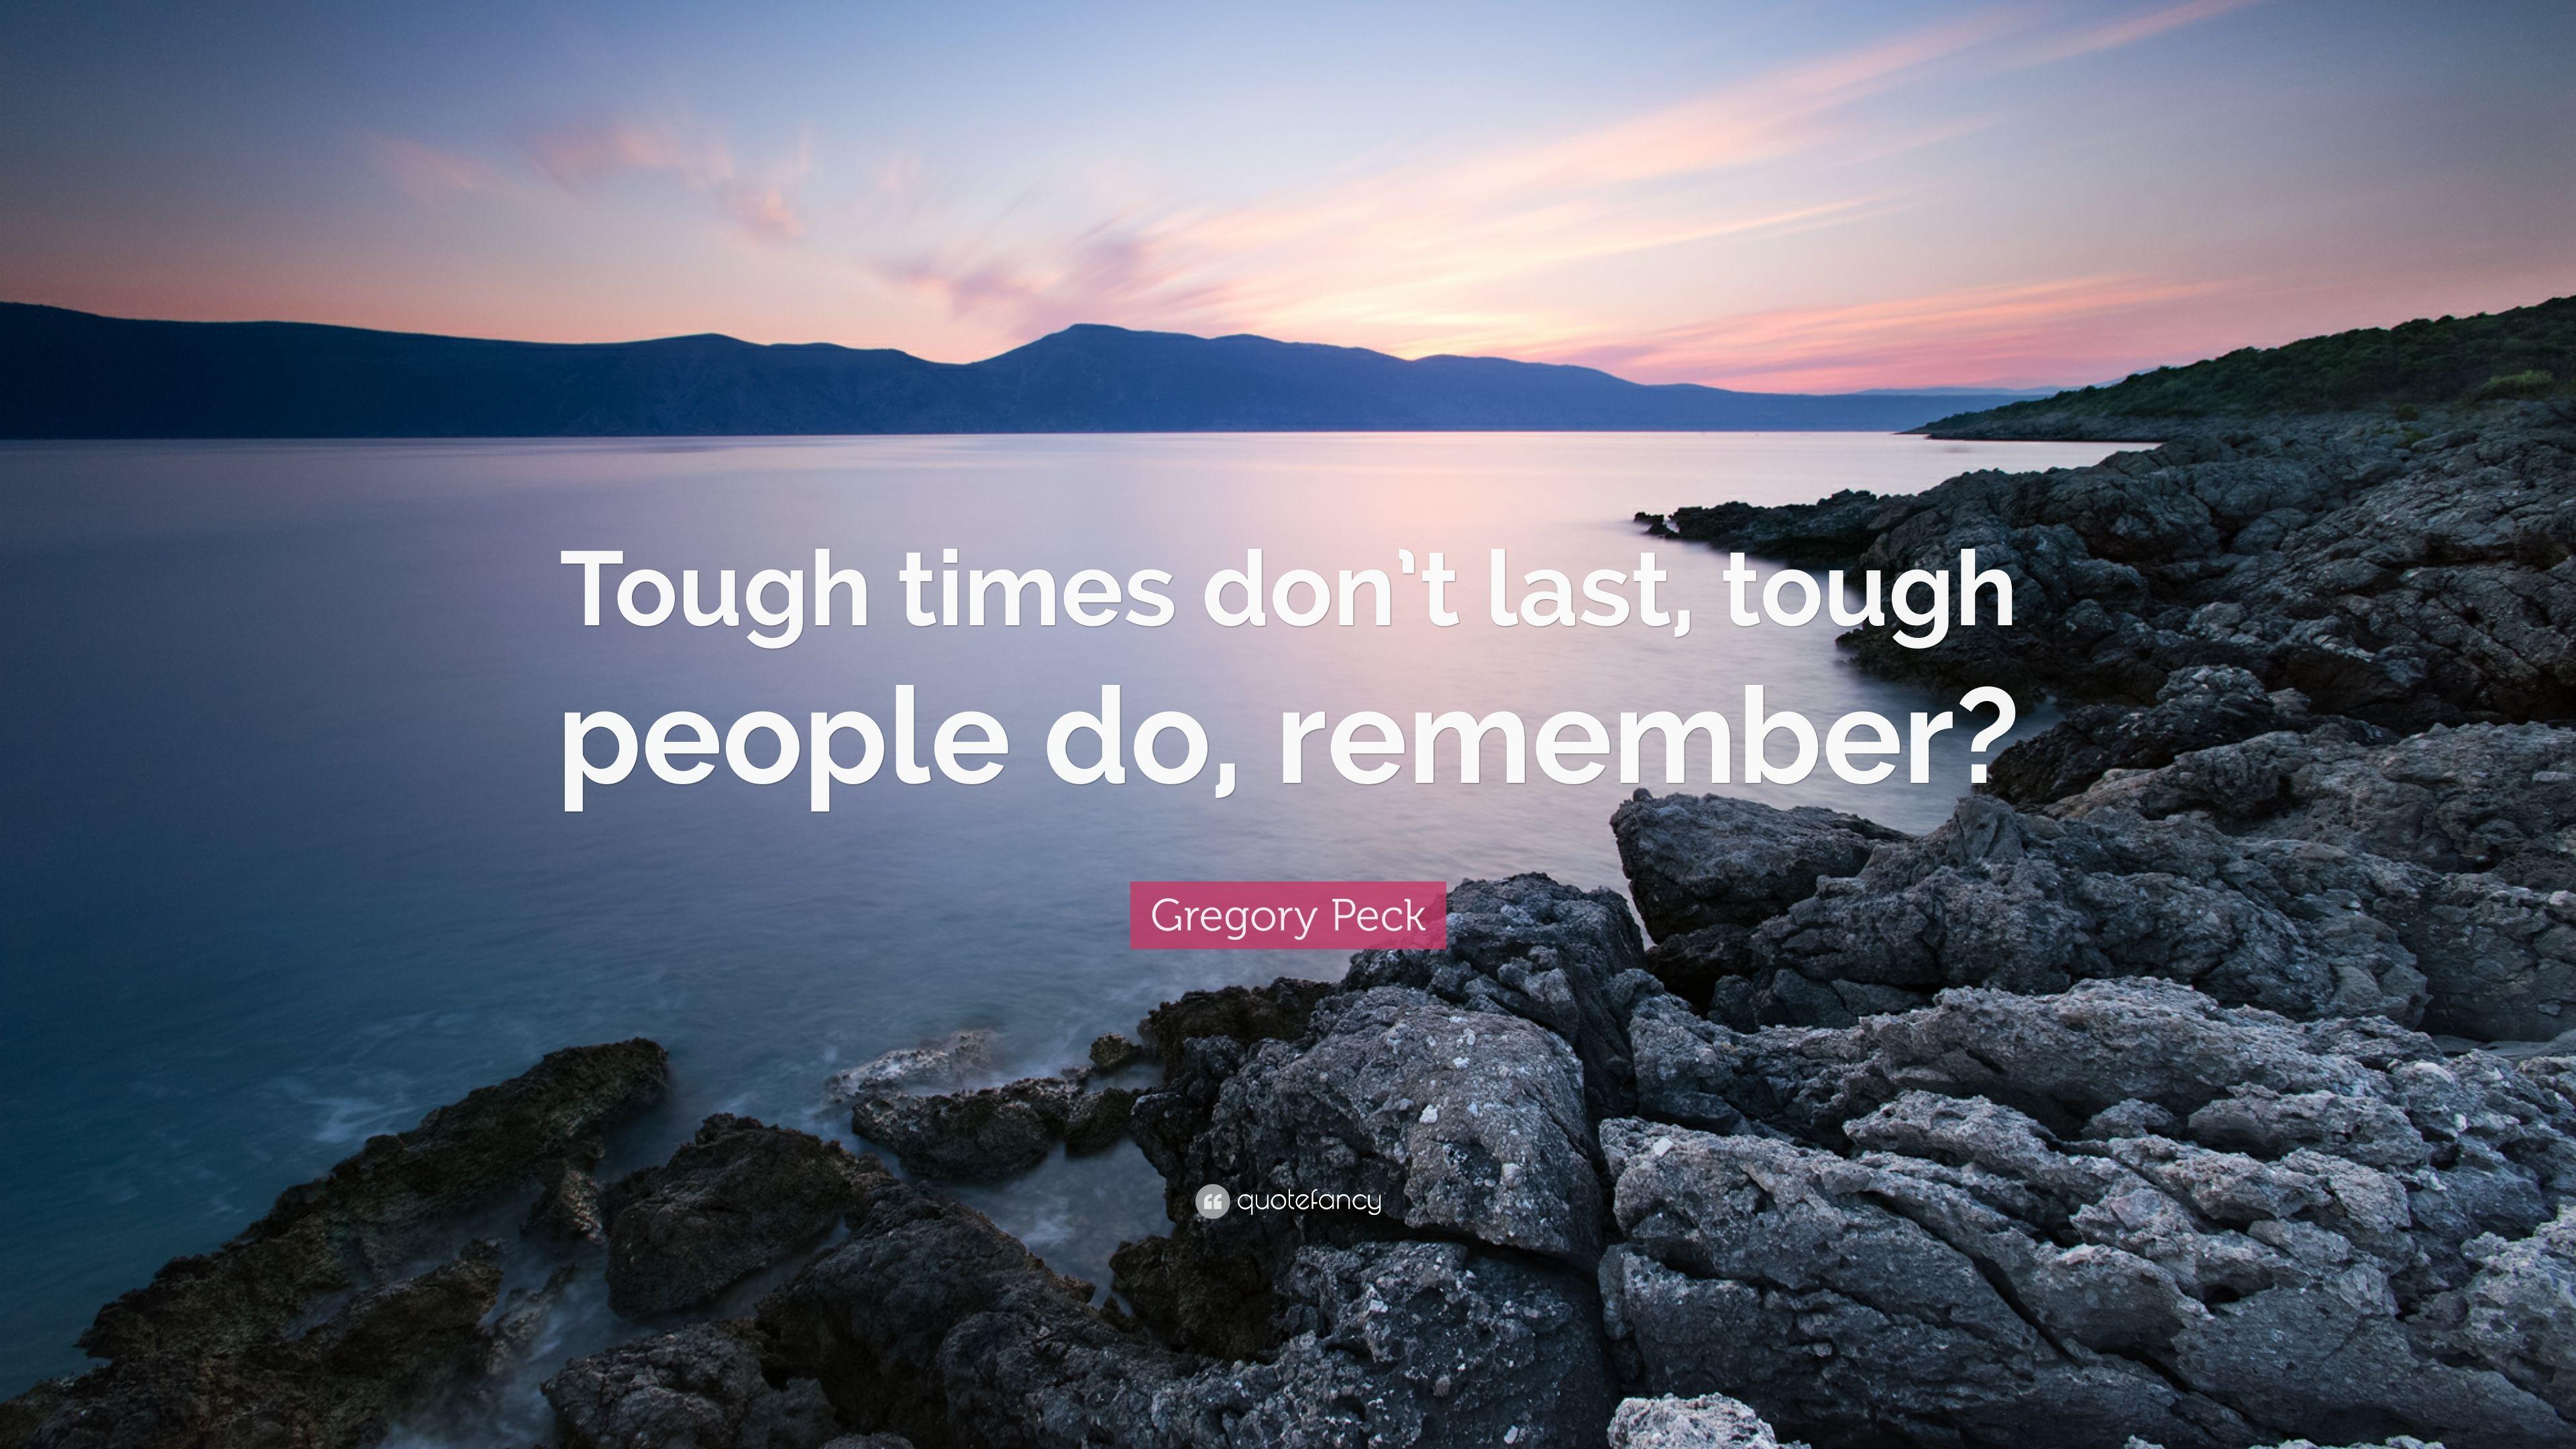 Gregory Peck Quote: “Tough times don't last, tough people do